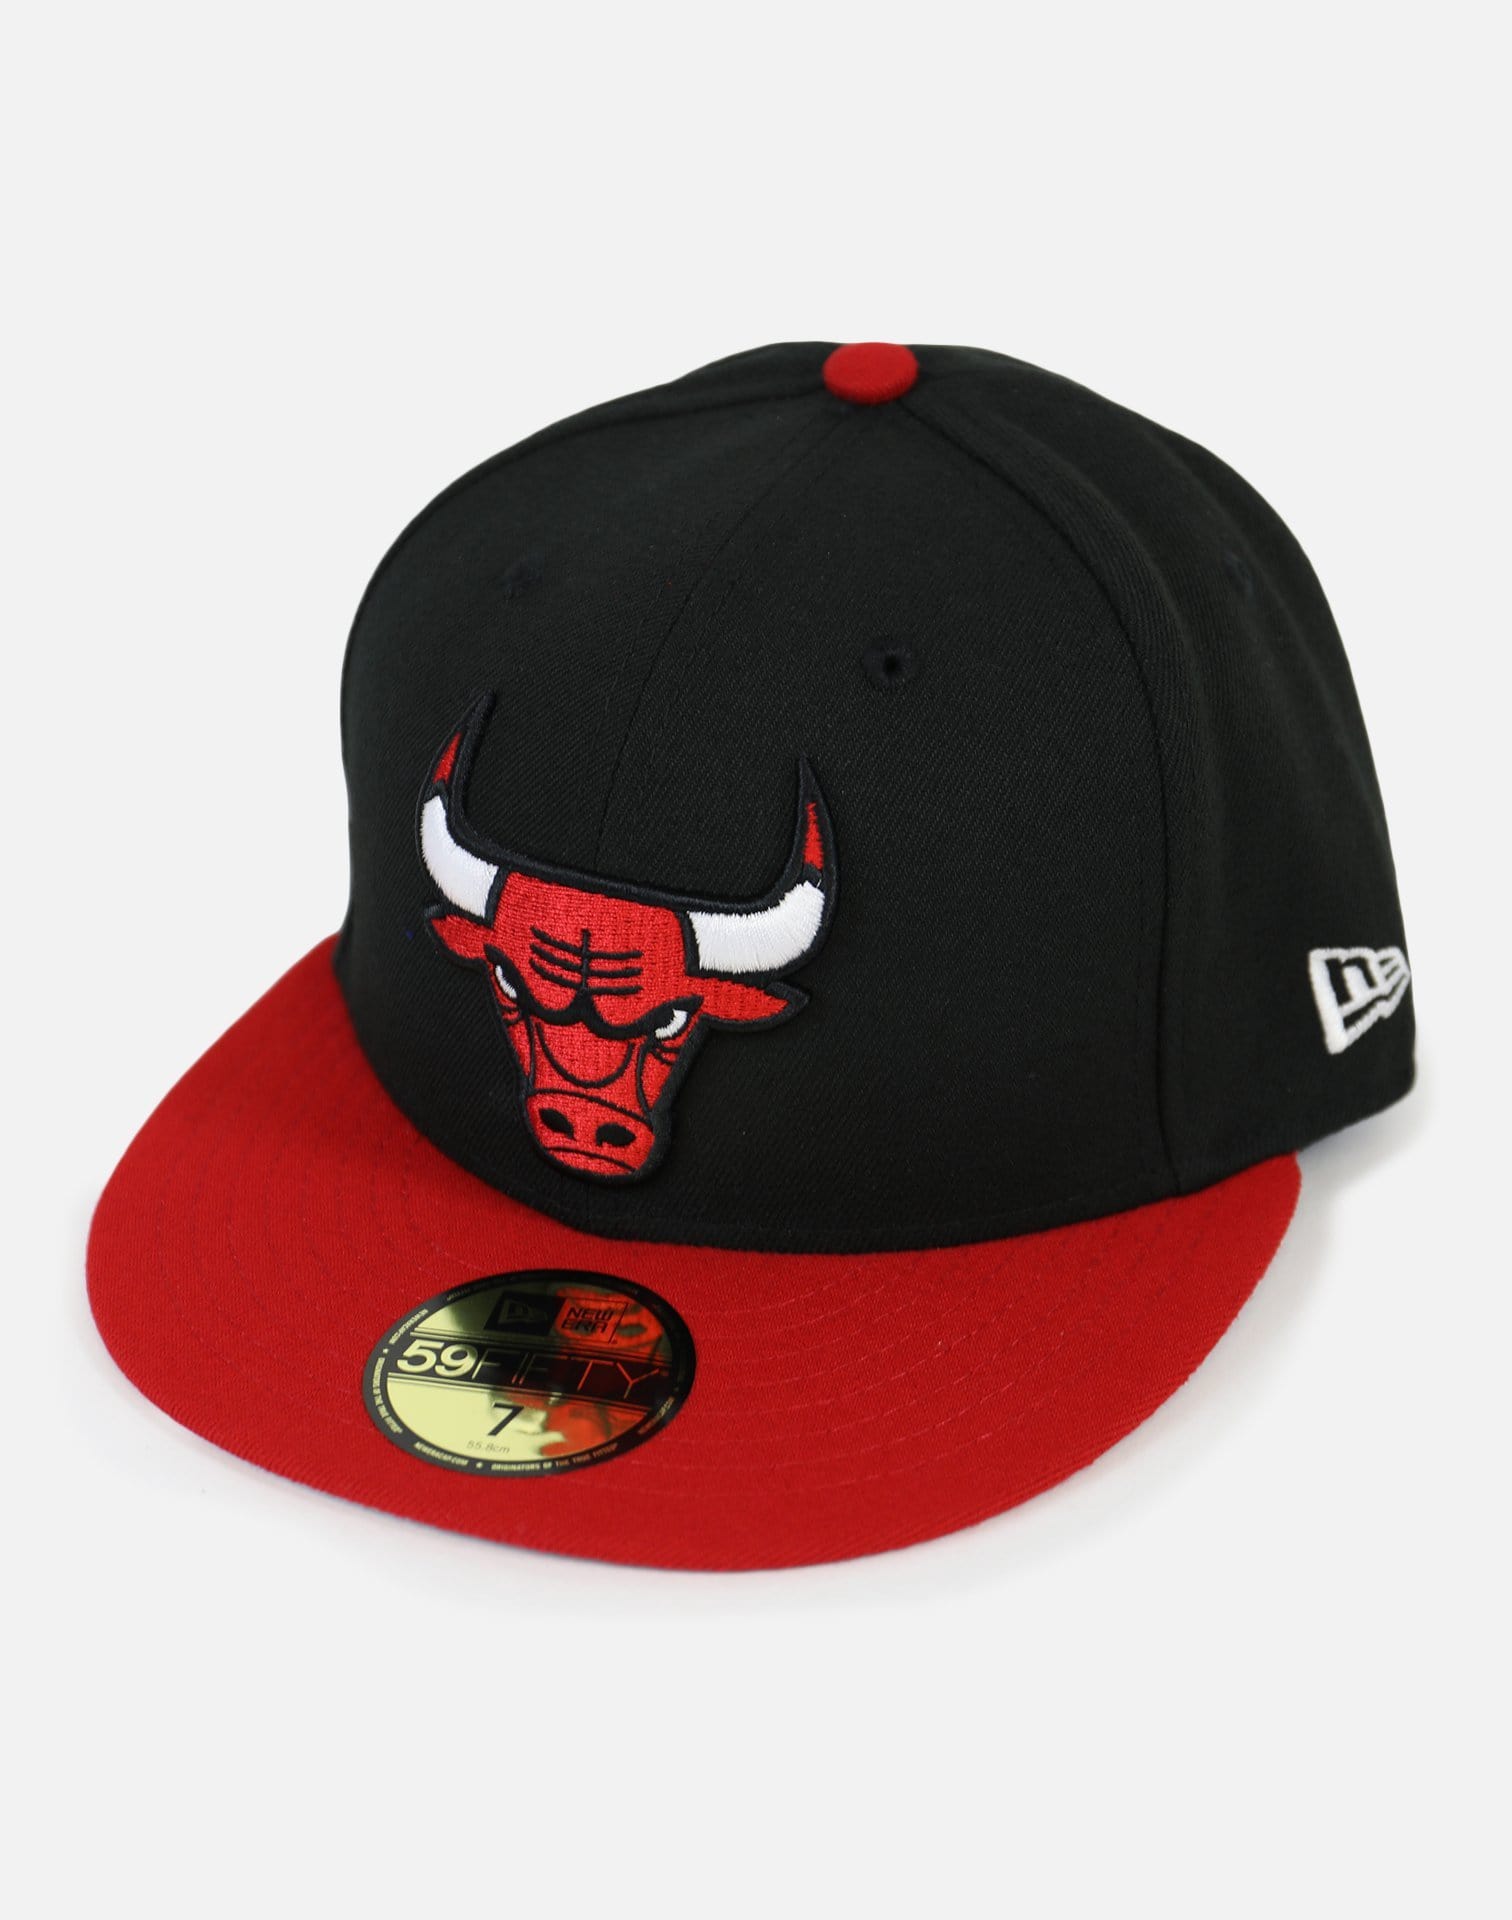 New Era Chicago Bulls Fitted Hat (Black/Red)